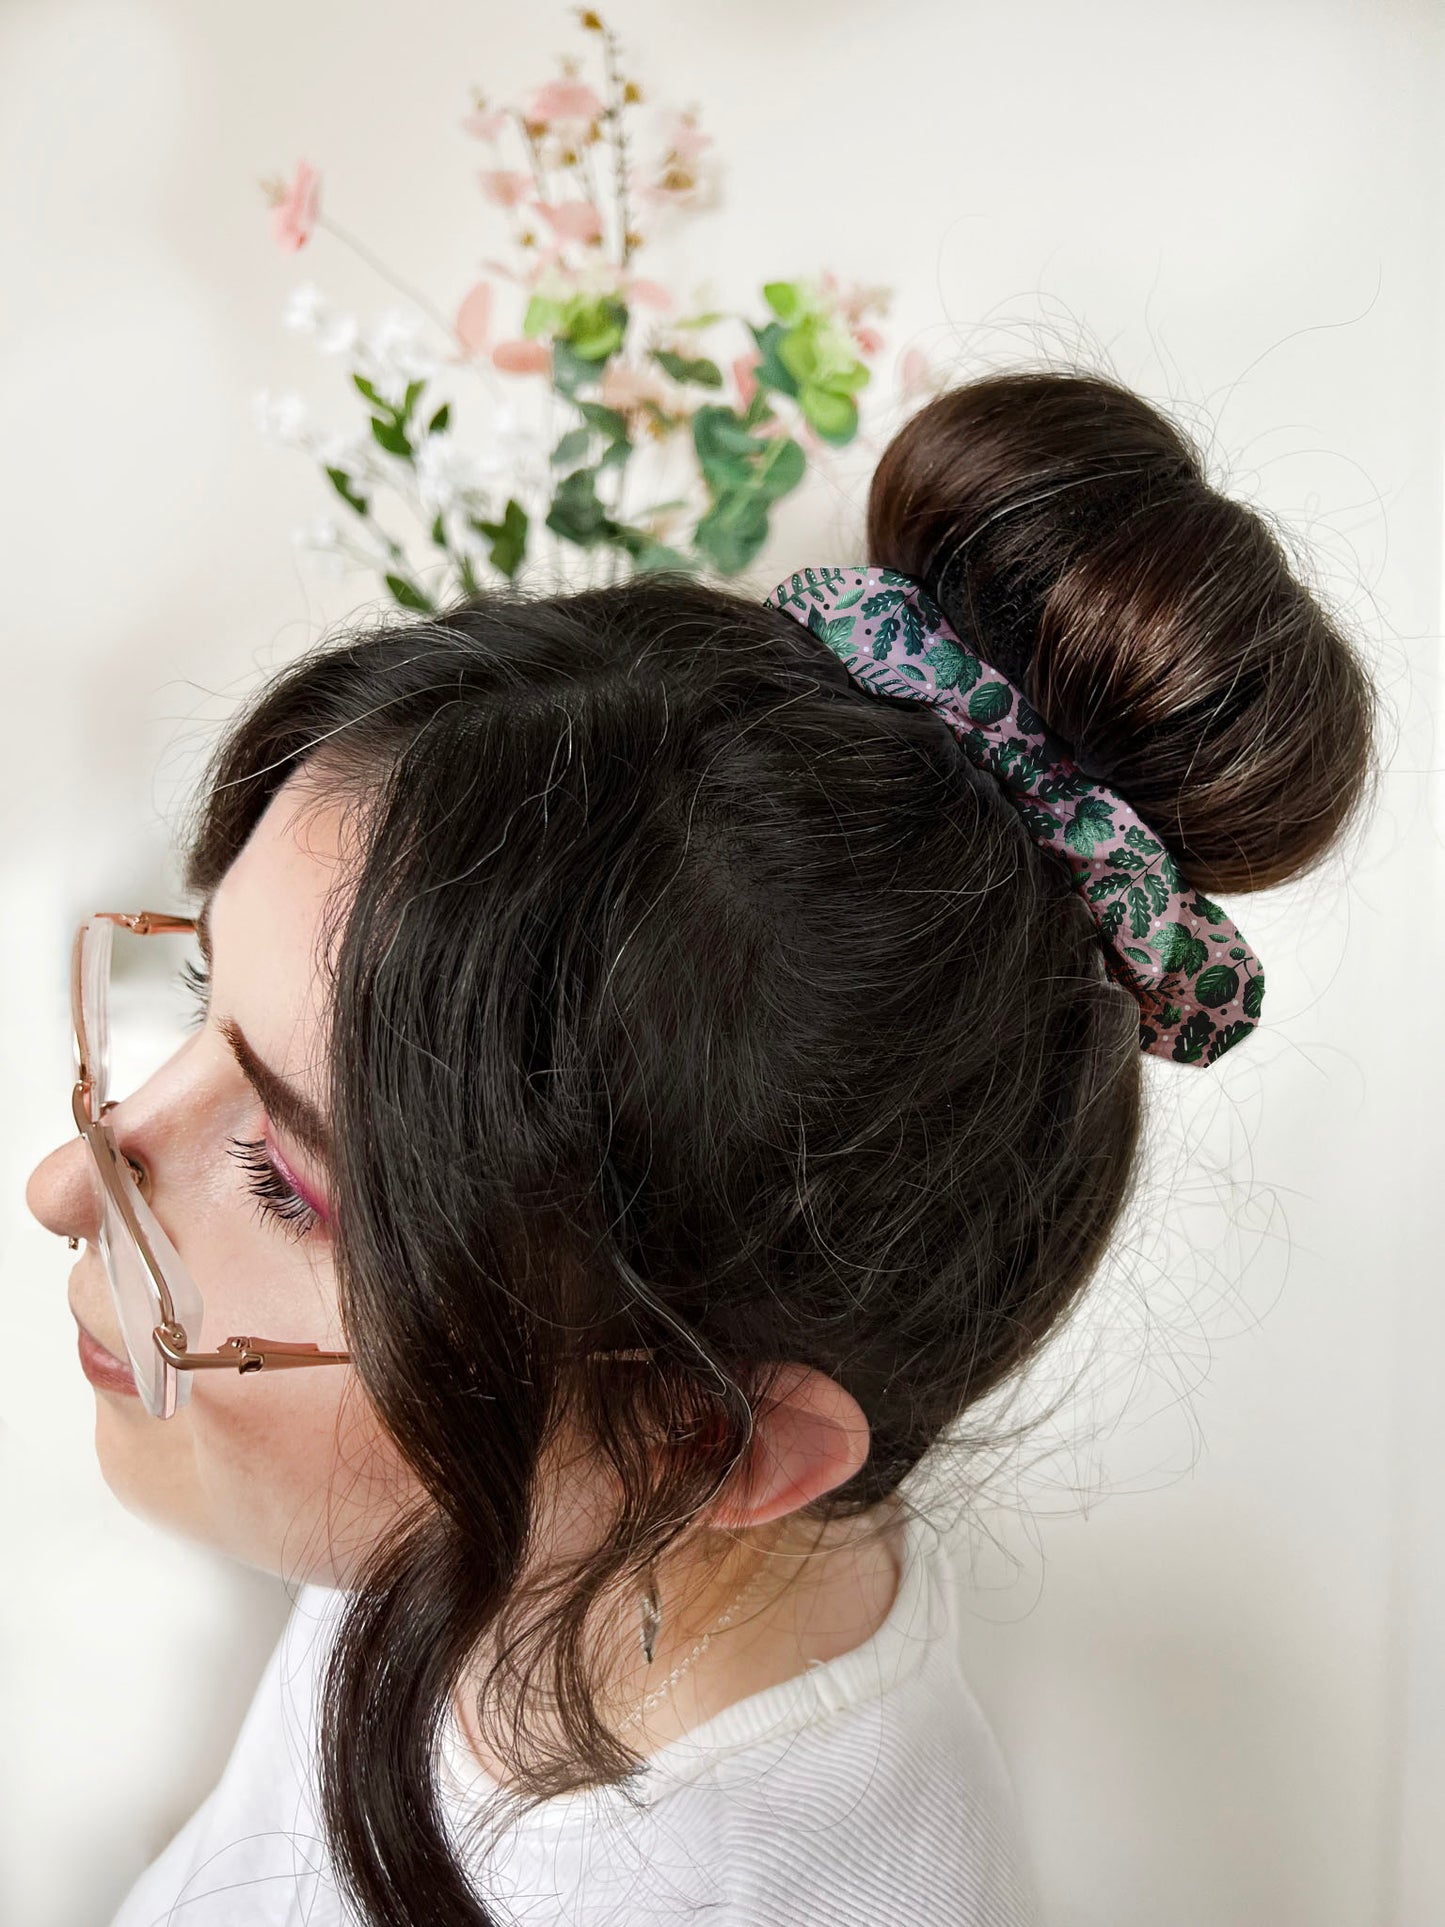 Girl with dark hair photographed with up-do bun with a green foliage patterned scrunchie securing it. Plants in background in white room.